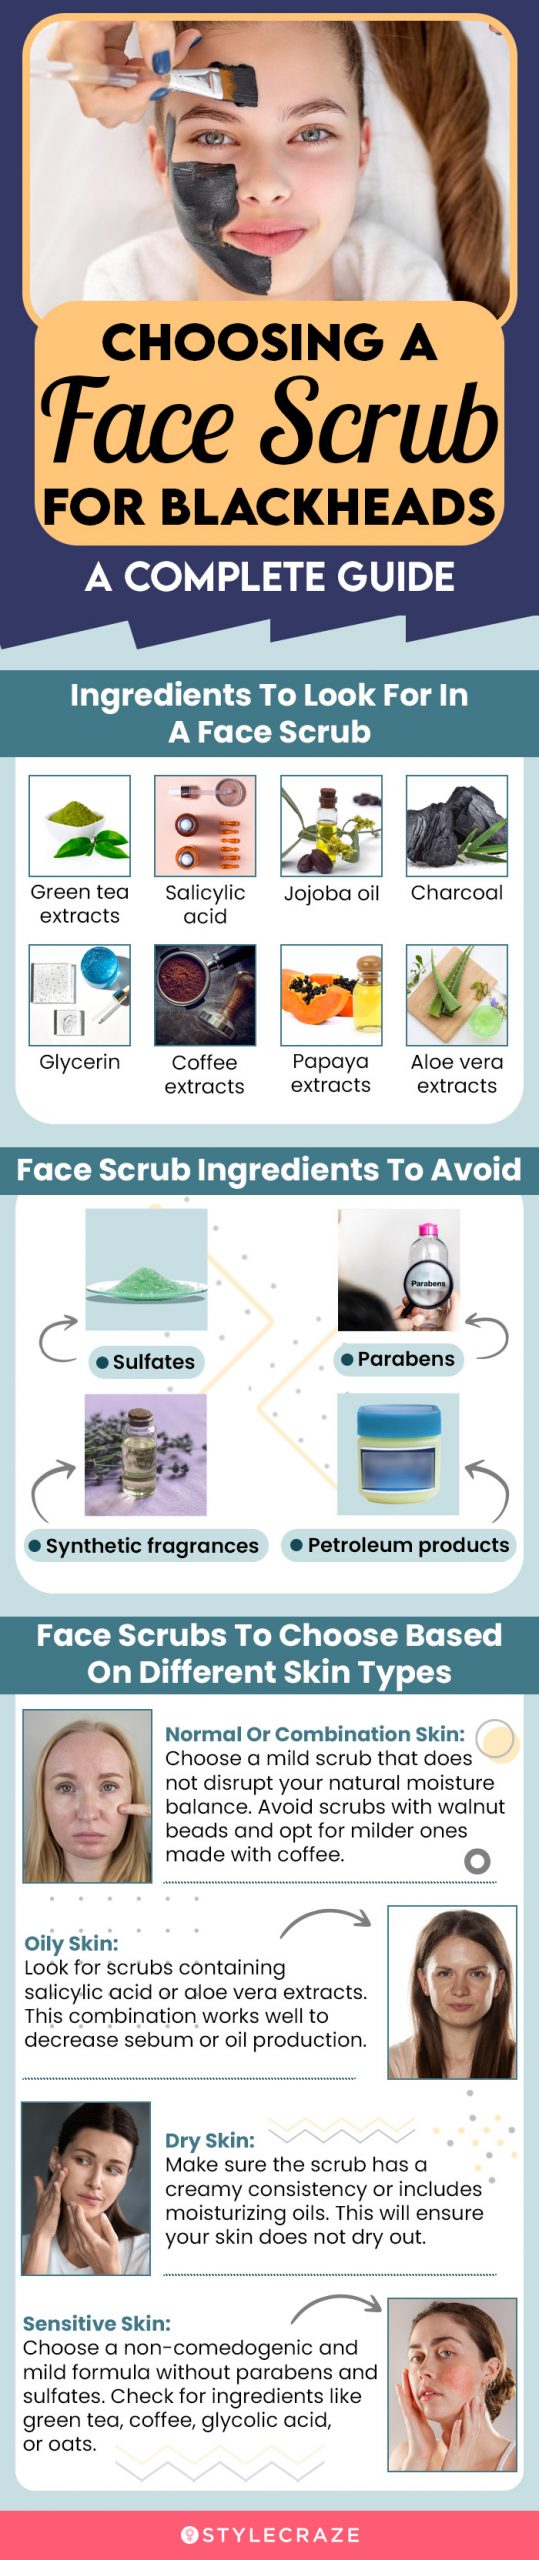 Choosing A Face Scrub For Blackheads: A Complete Guide (infographic)